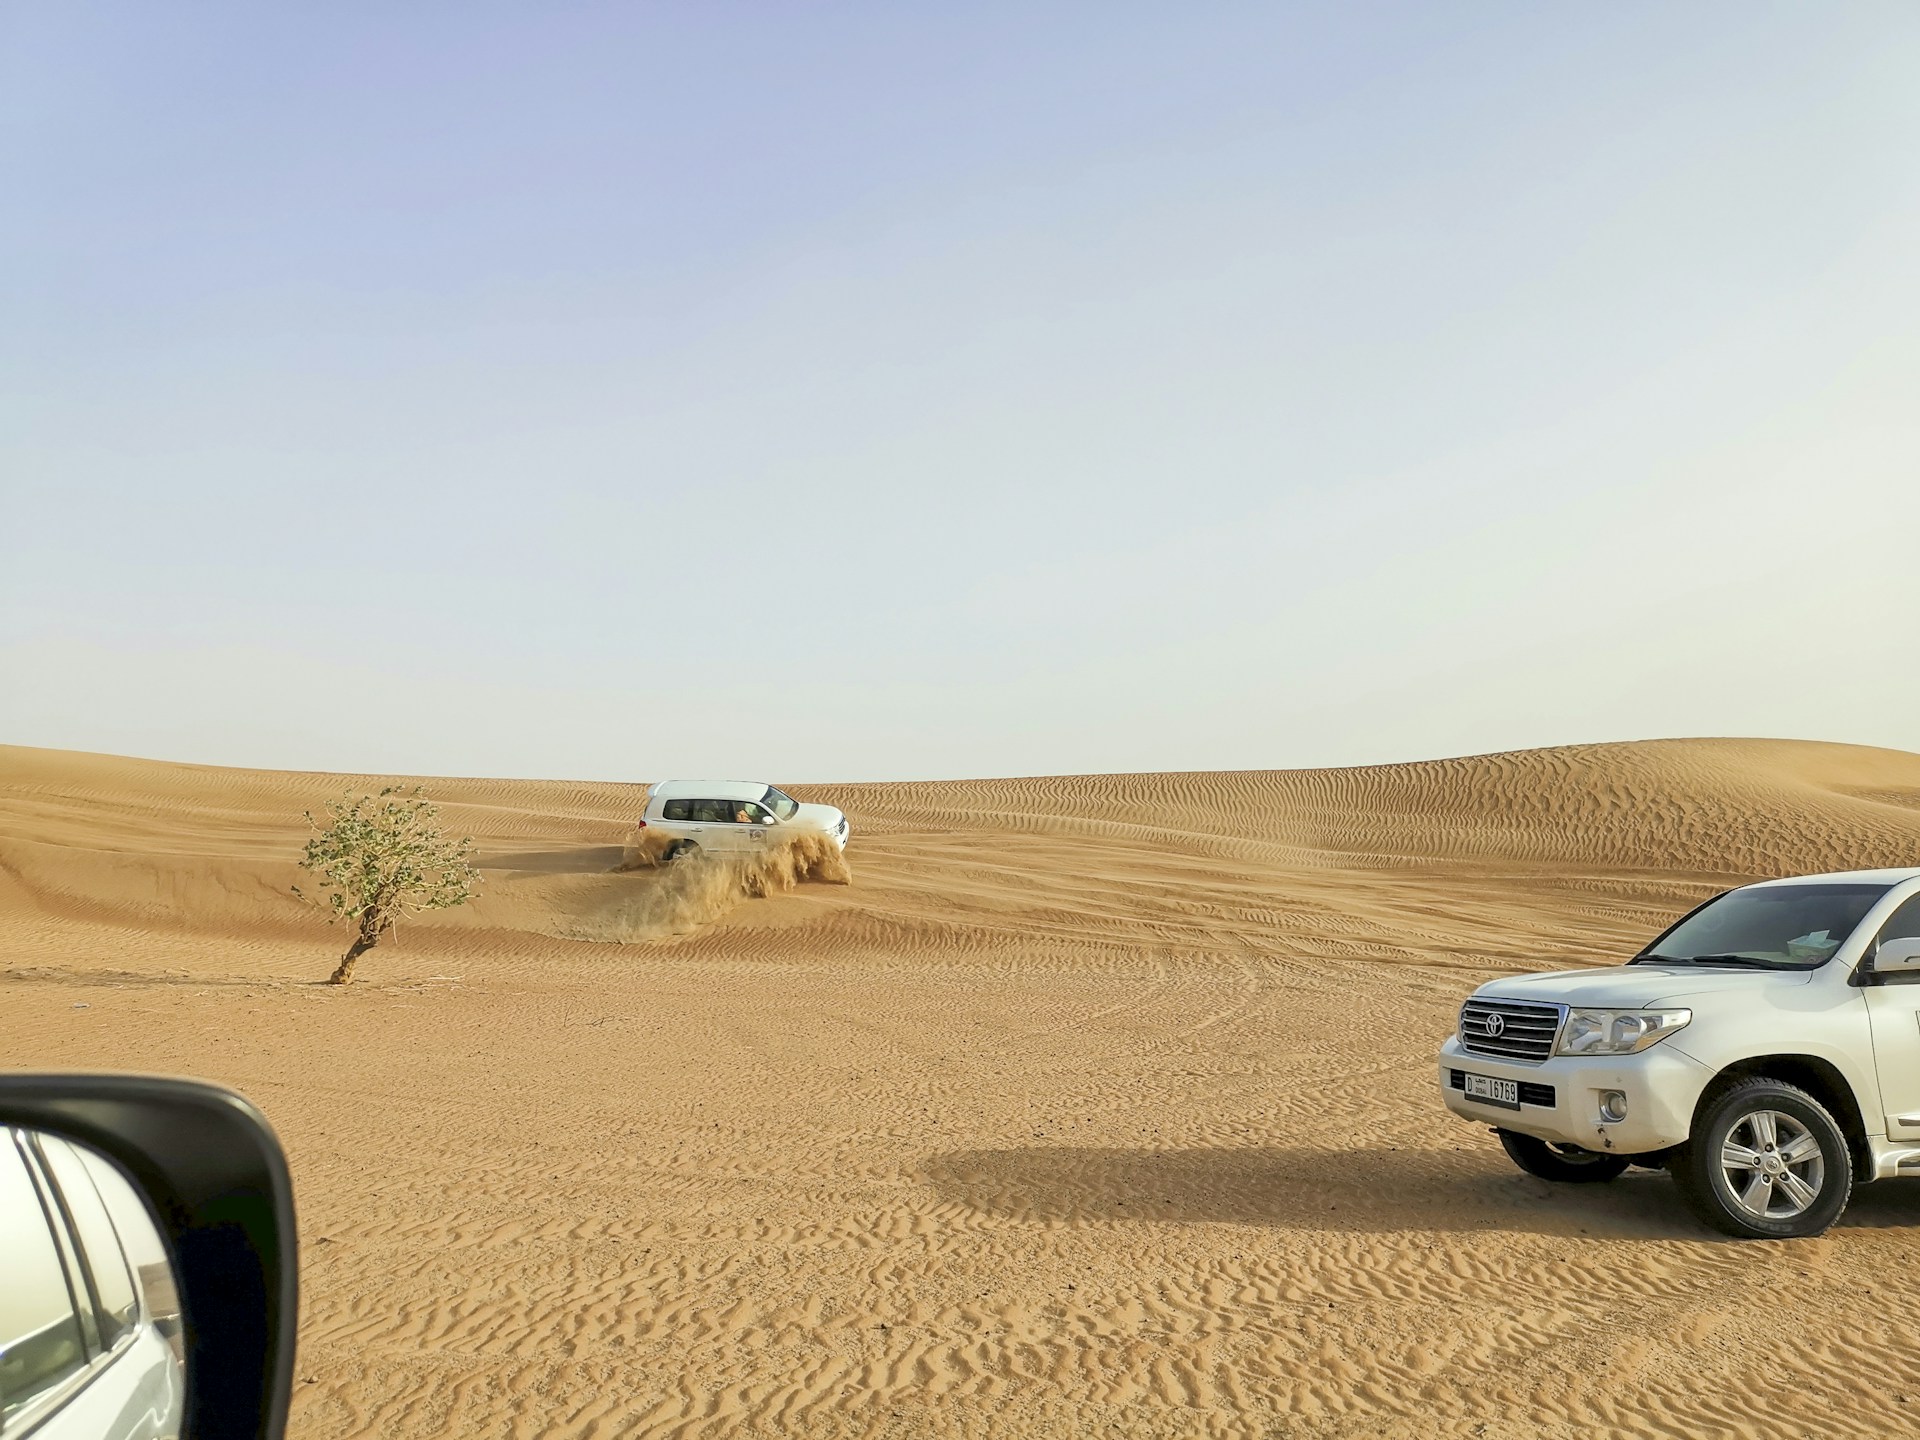 a car driving through the desert with a truck in the background